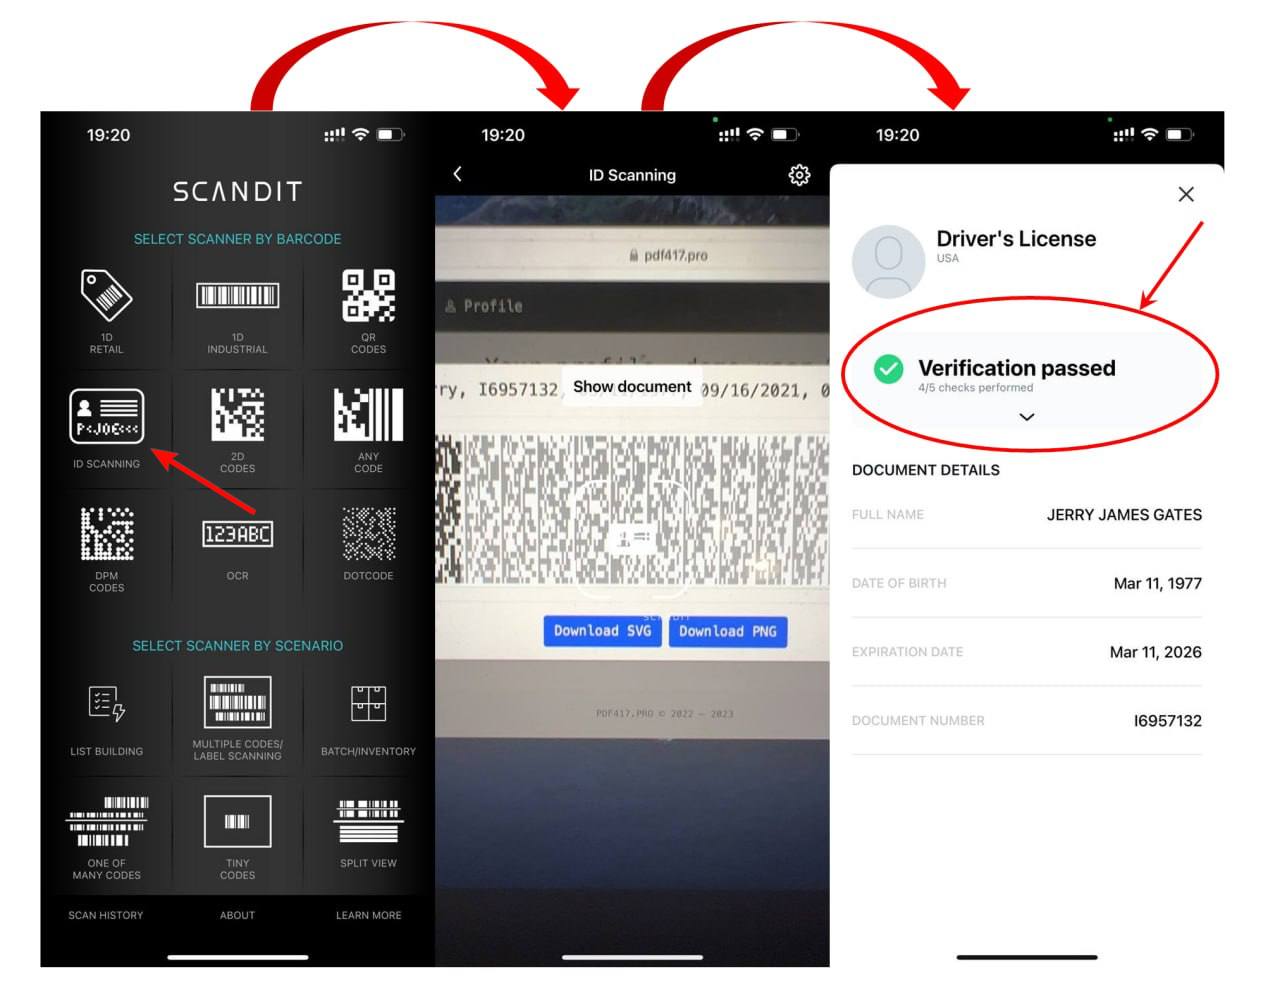 Scandit application for barcode checking